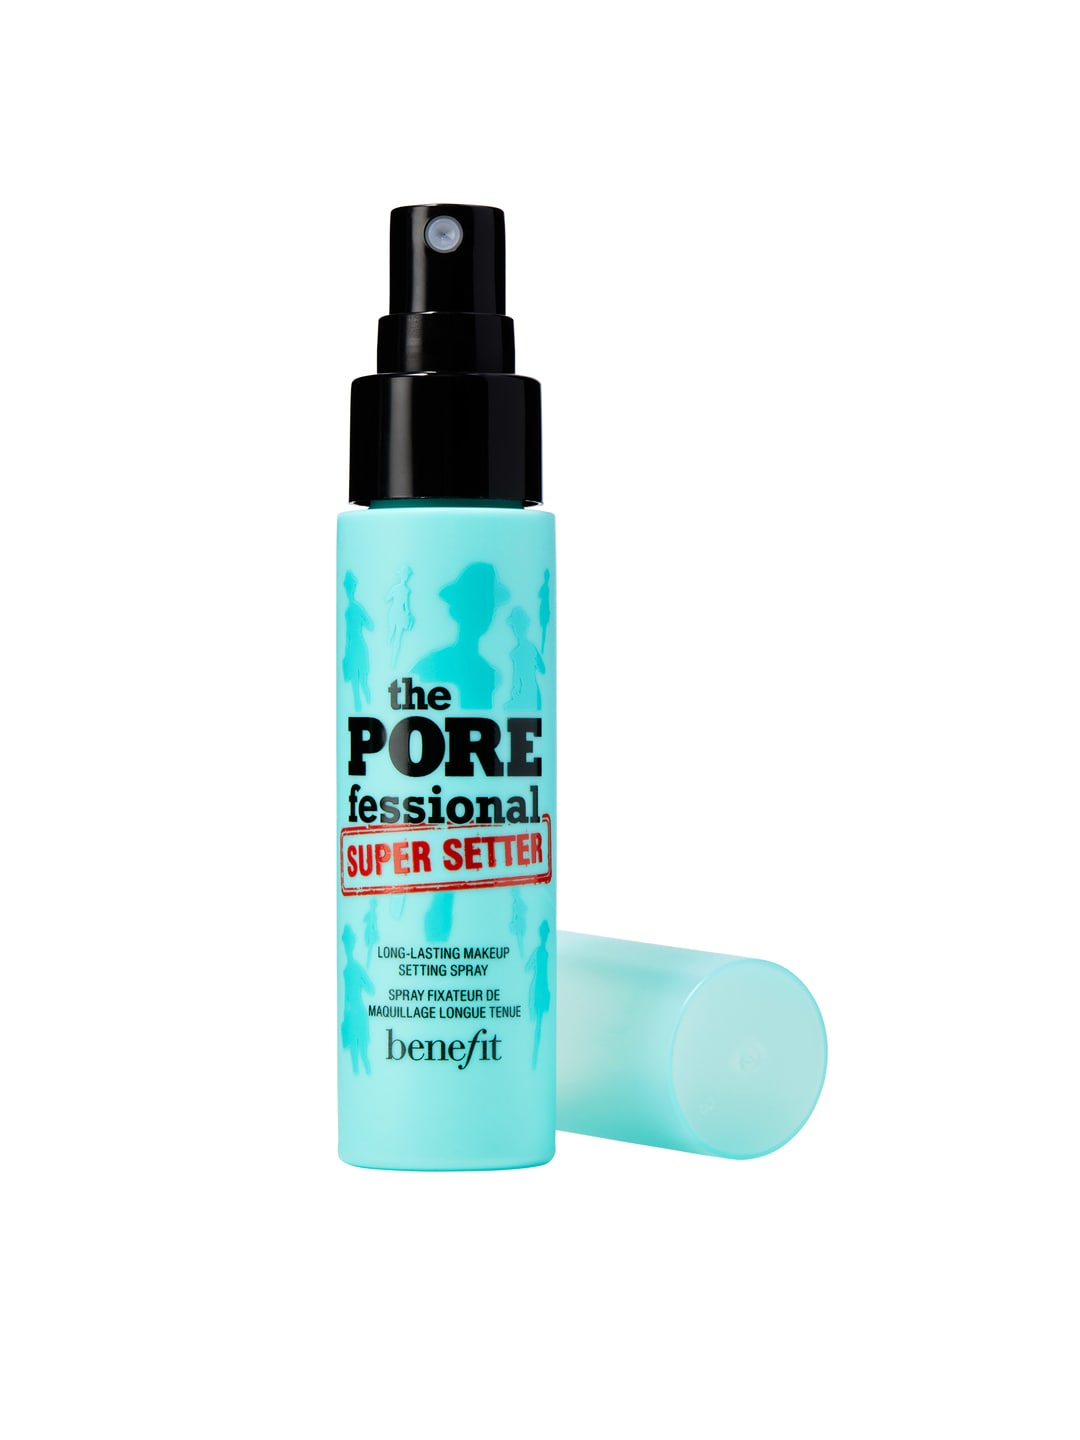 Benefit Cosmetics The POREfessional Super Setter Long-Lasting Makeup Setting Spray Mini Price in India